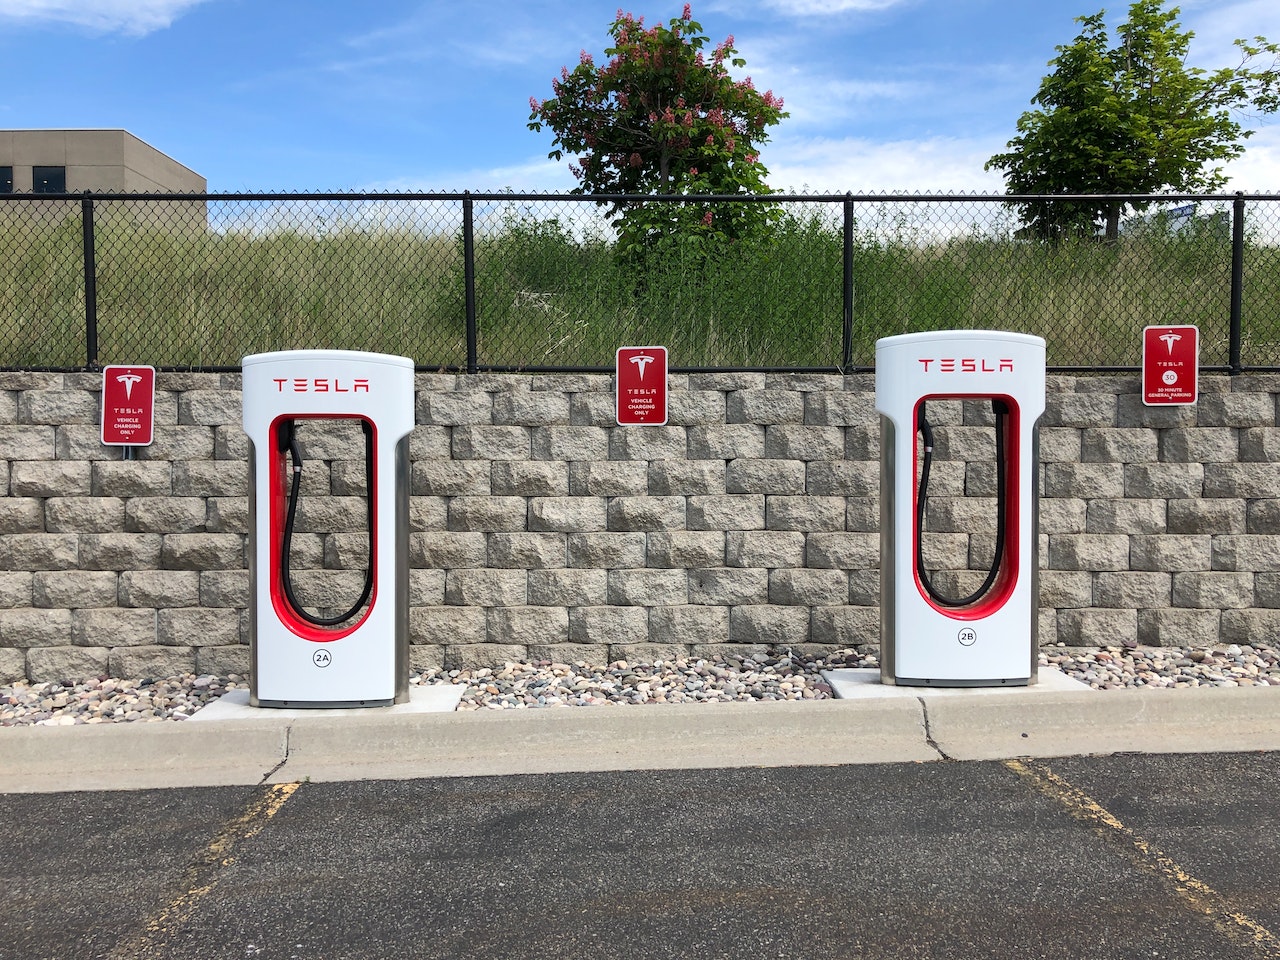 can you charge any EV at a Tesla charging station?